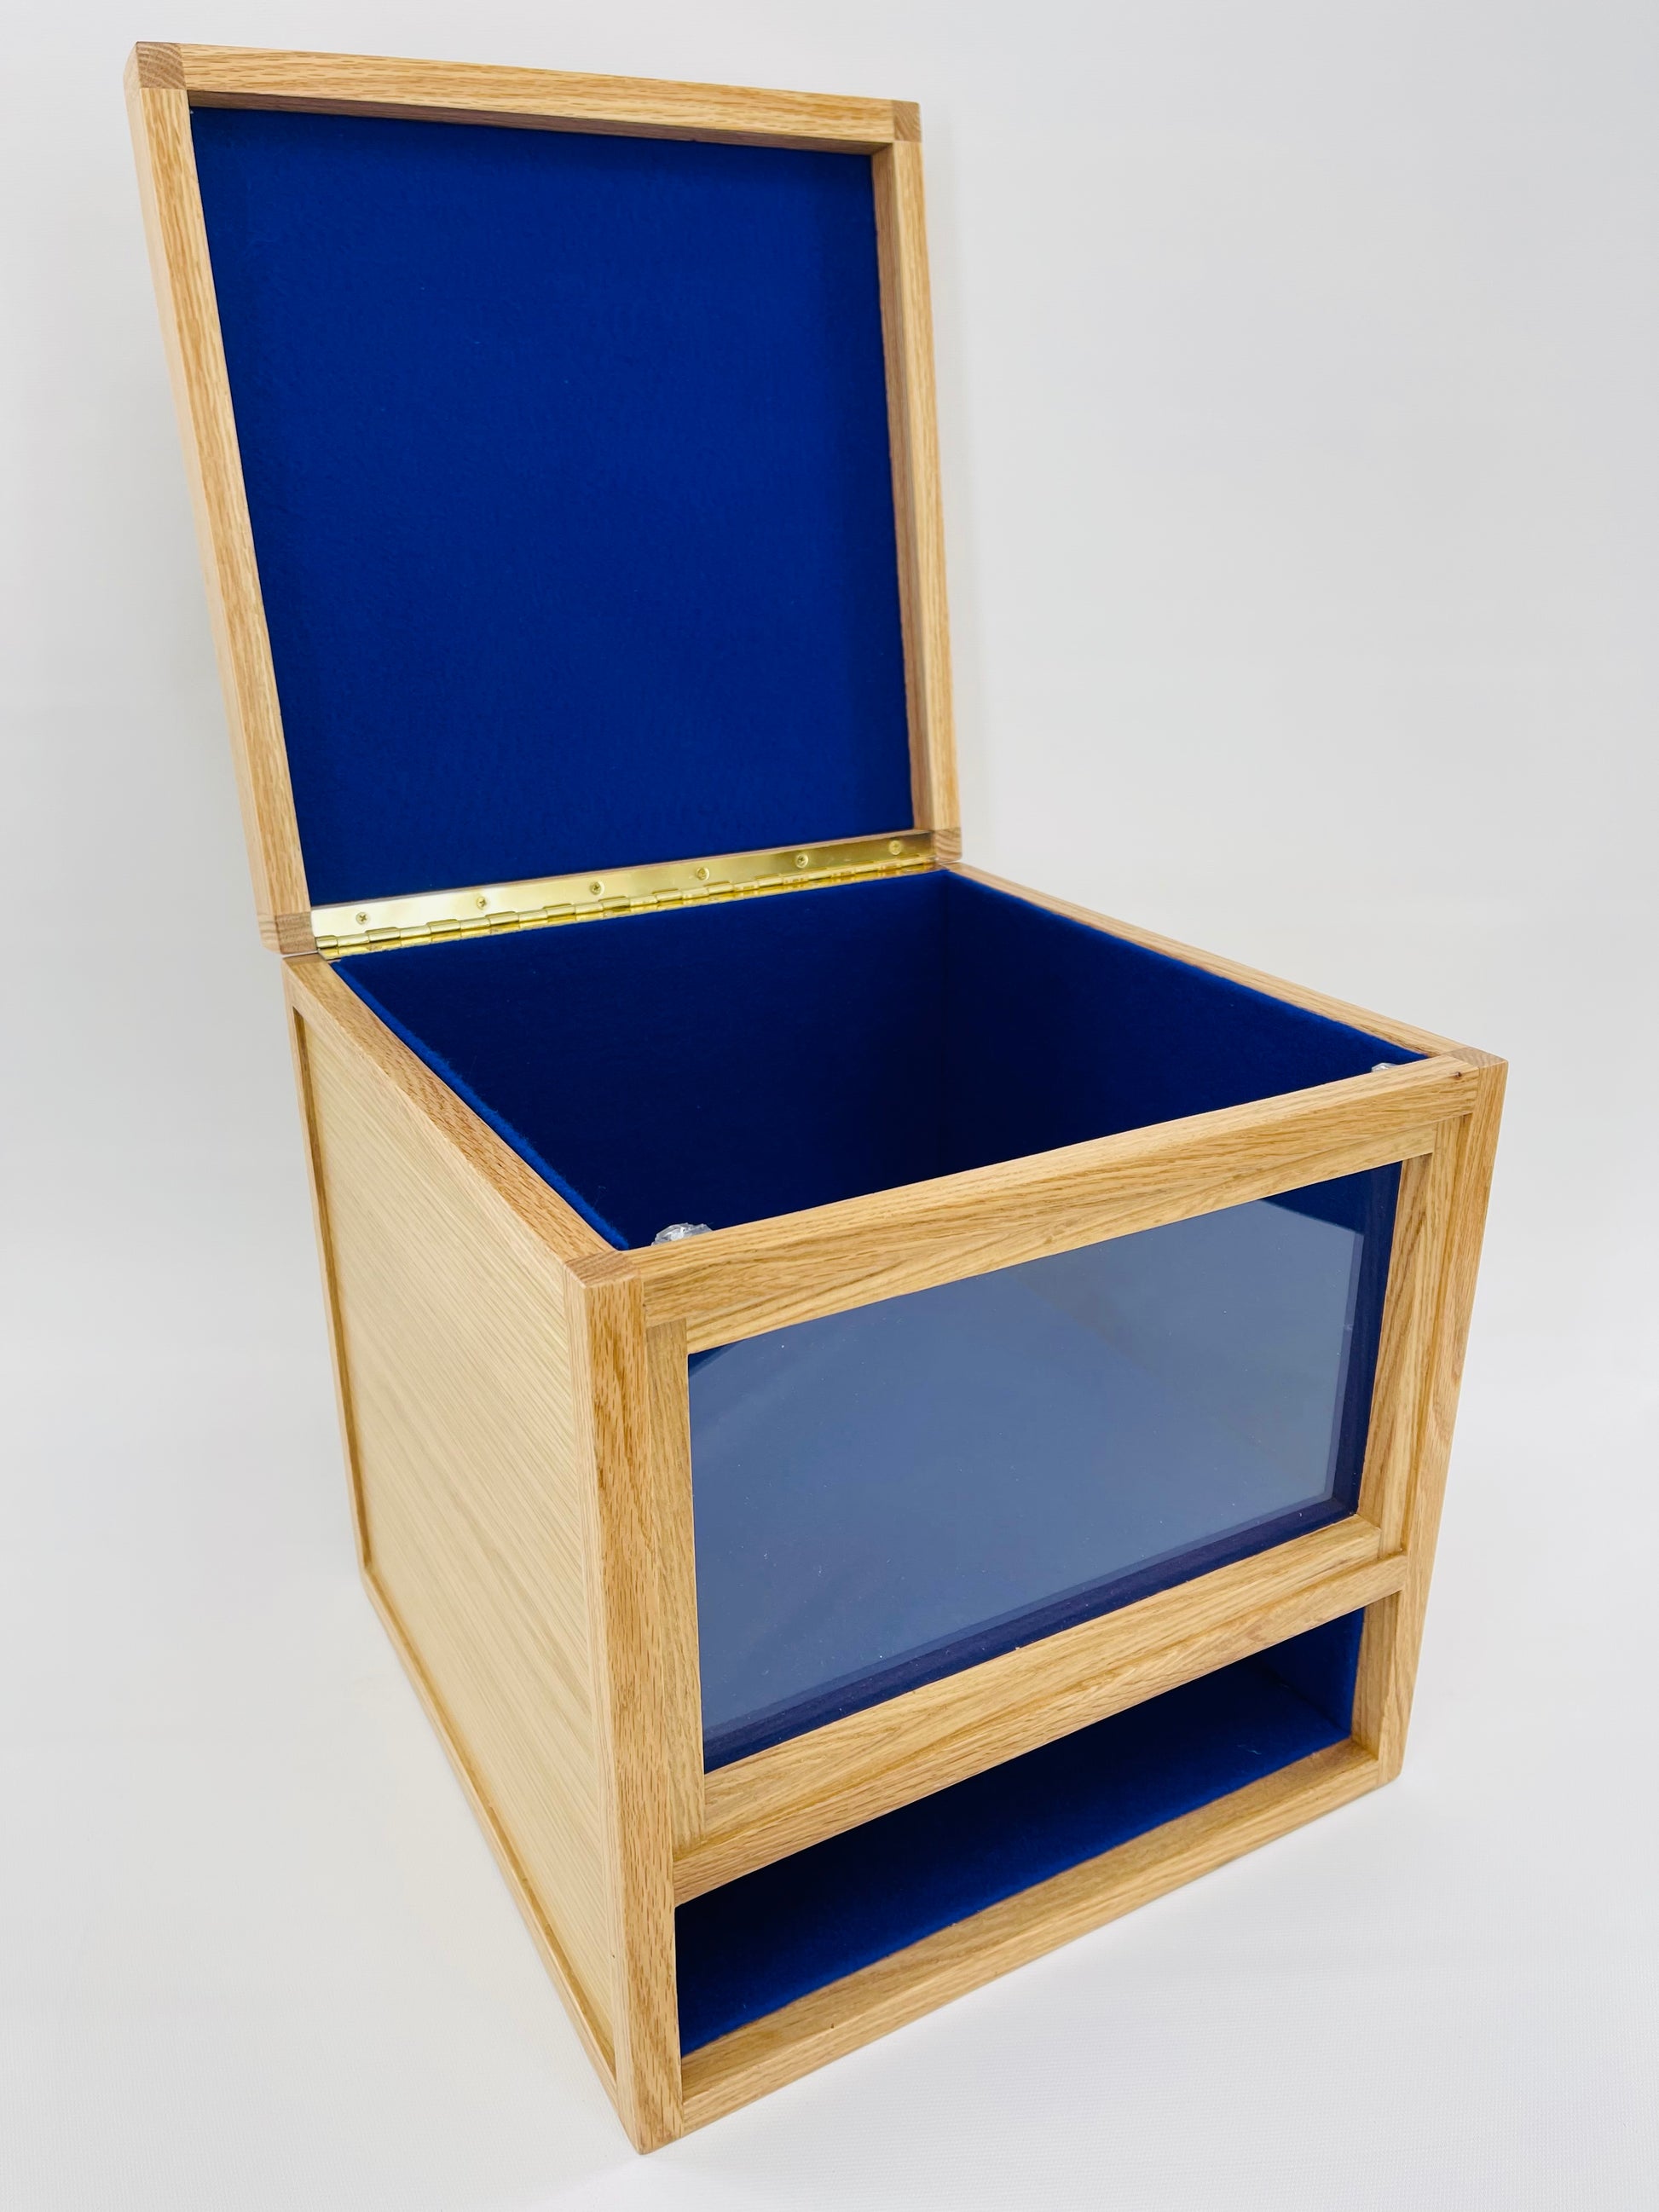 USCG Wooden Hat Box<p><h5><span style="color: #2b00ff;">(Base price shown) - TreeToBox